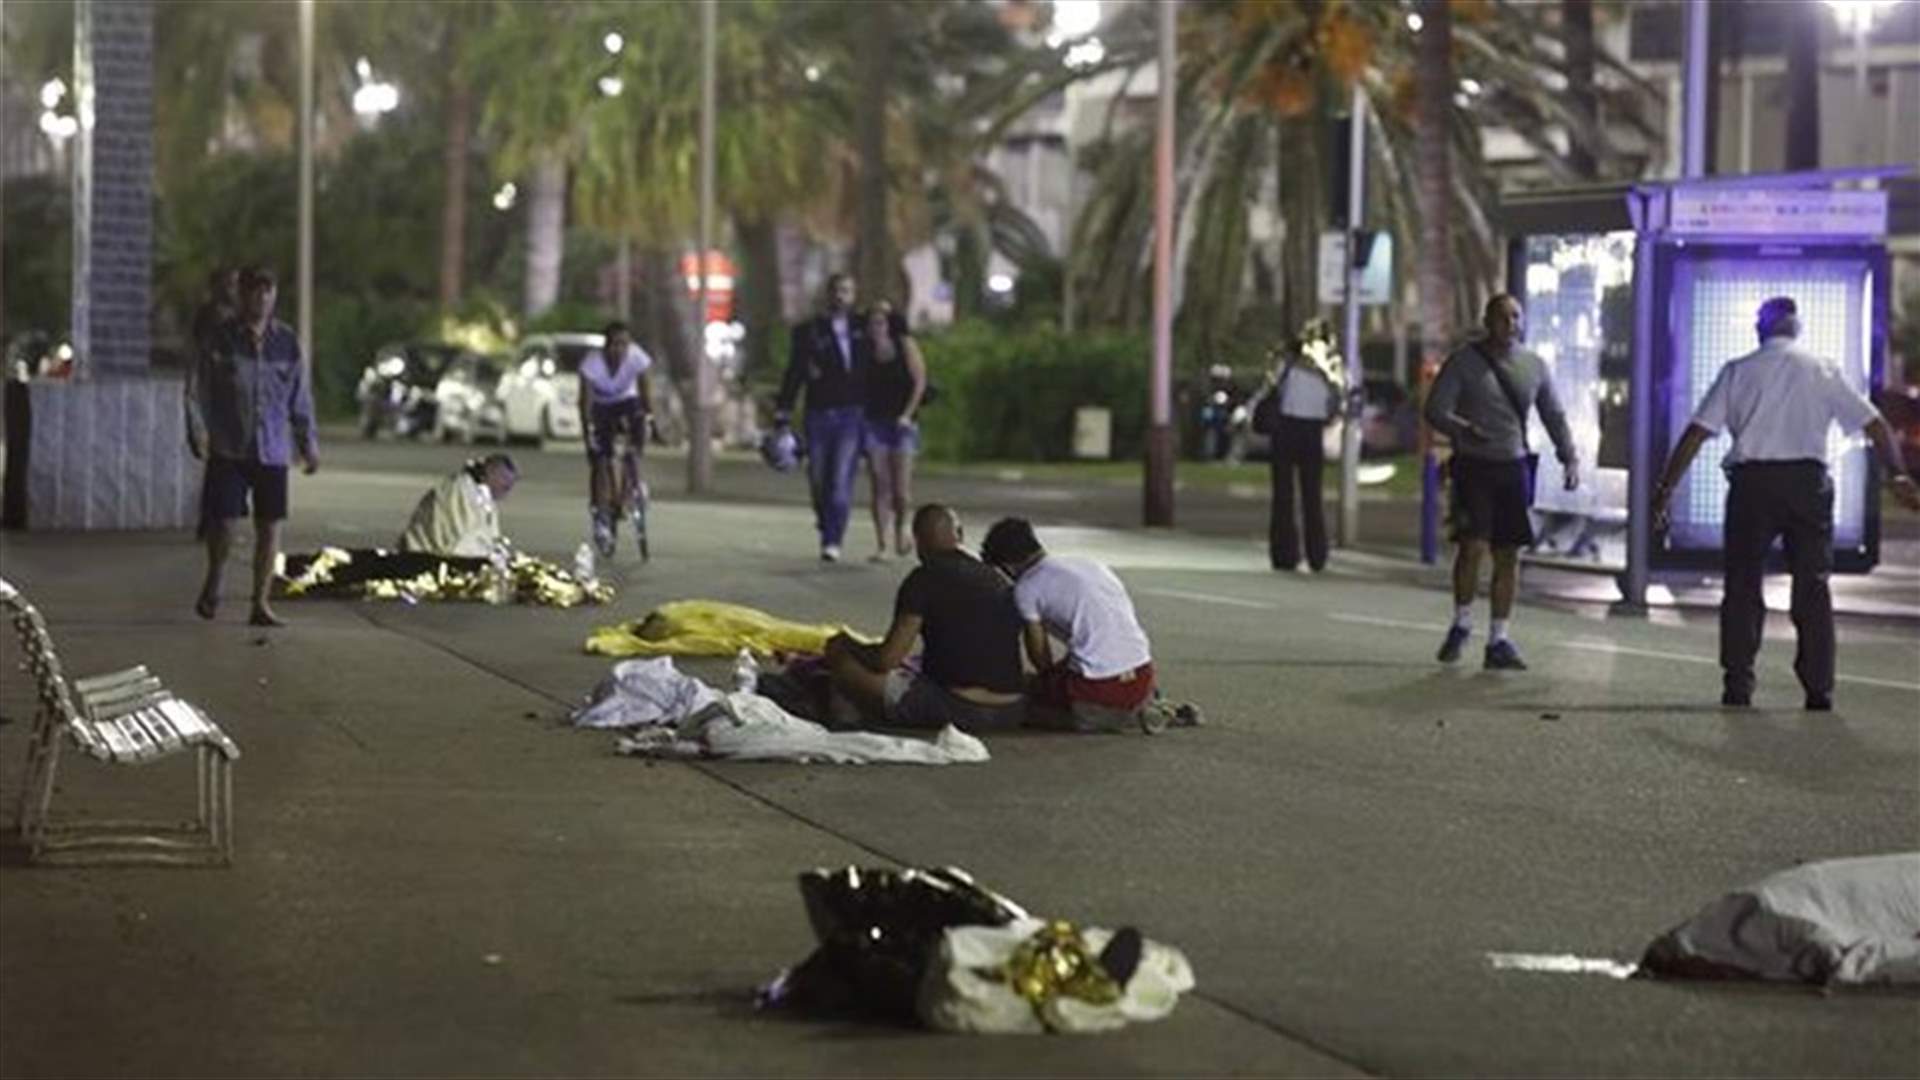 Lebanese officials denounce Nice attack, express solidarity with France 